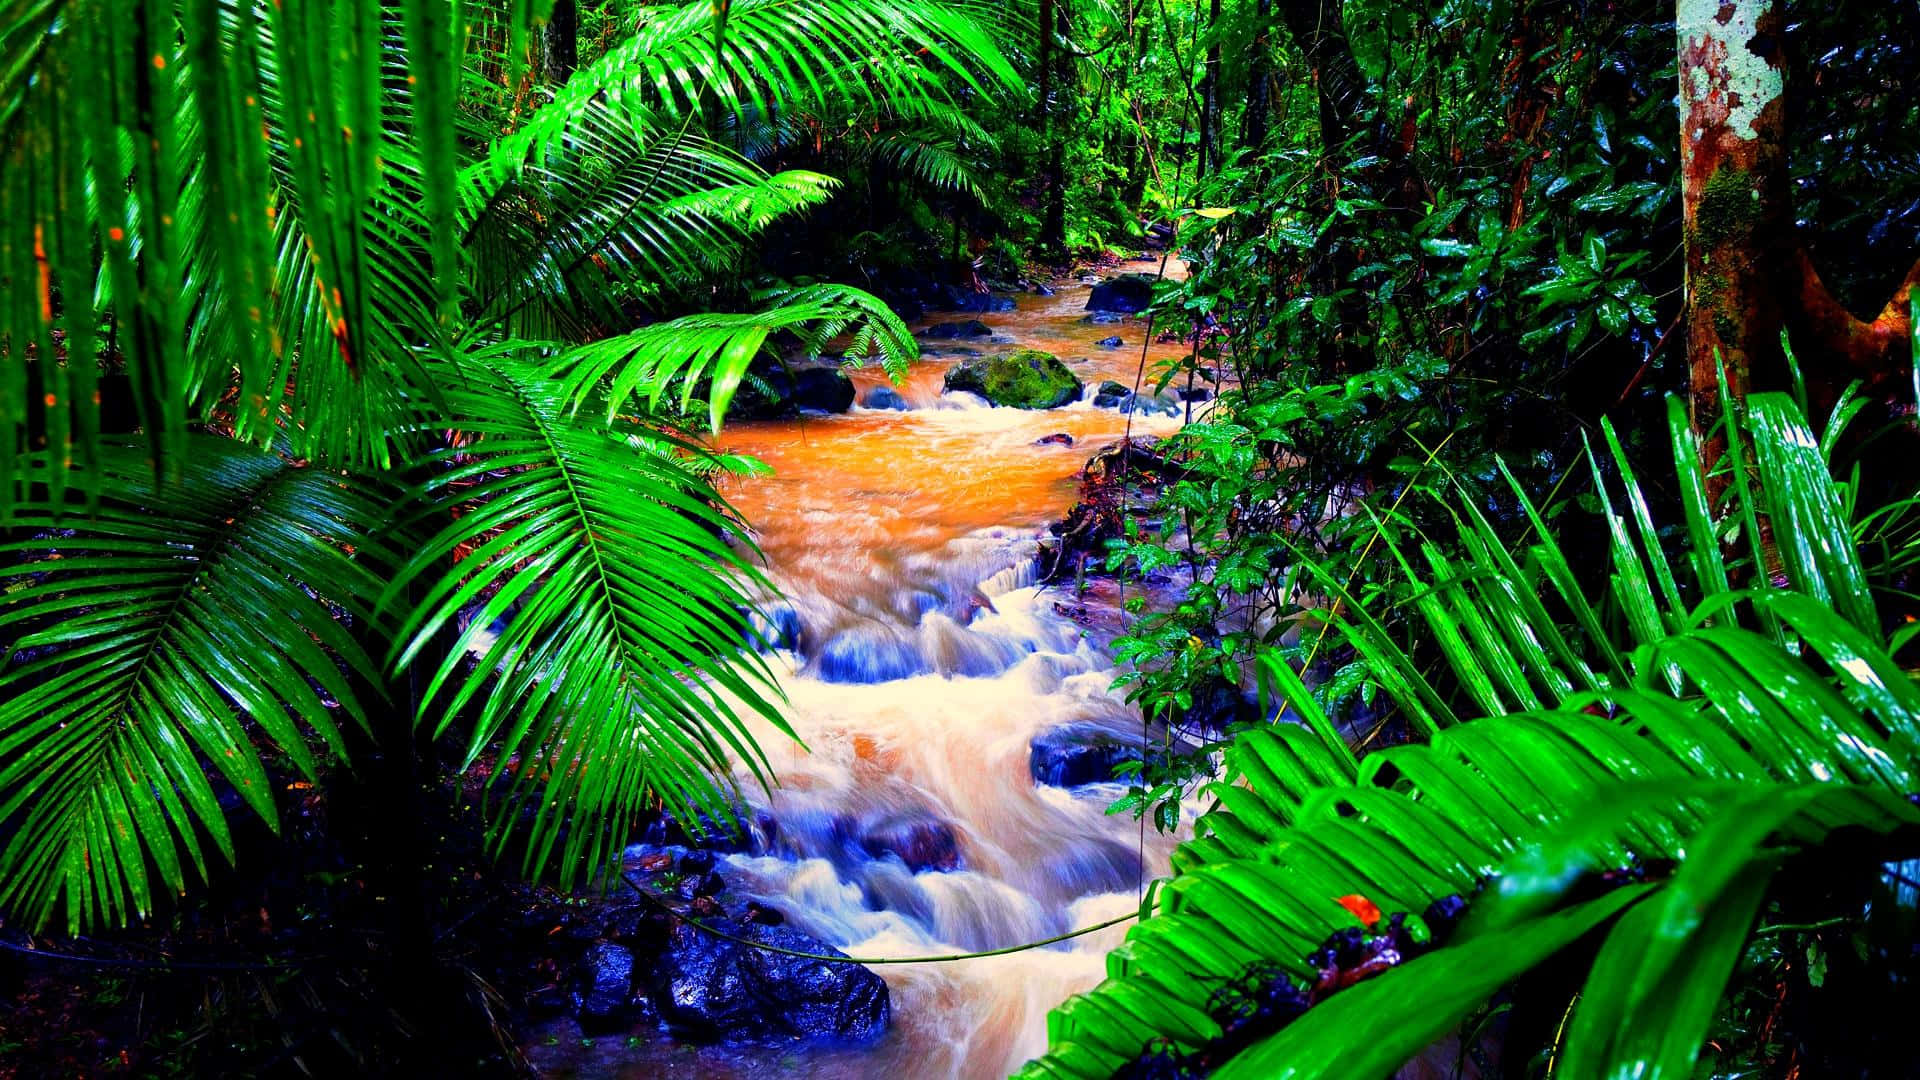 Explore the beauty of the jungle